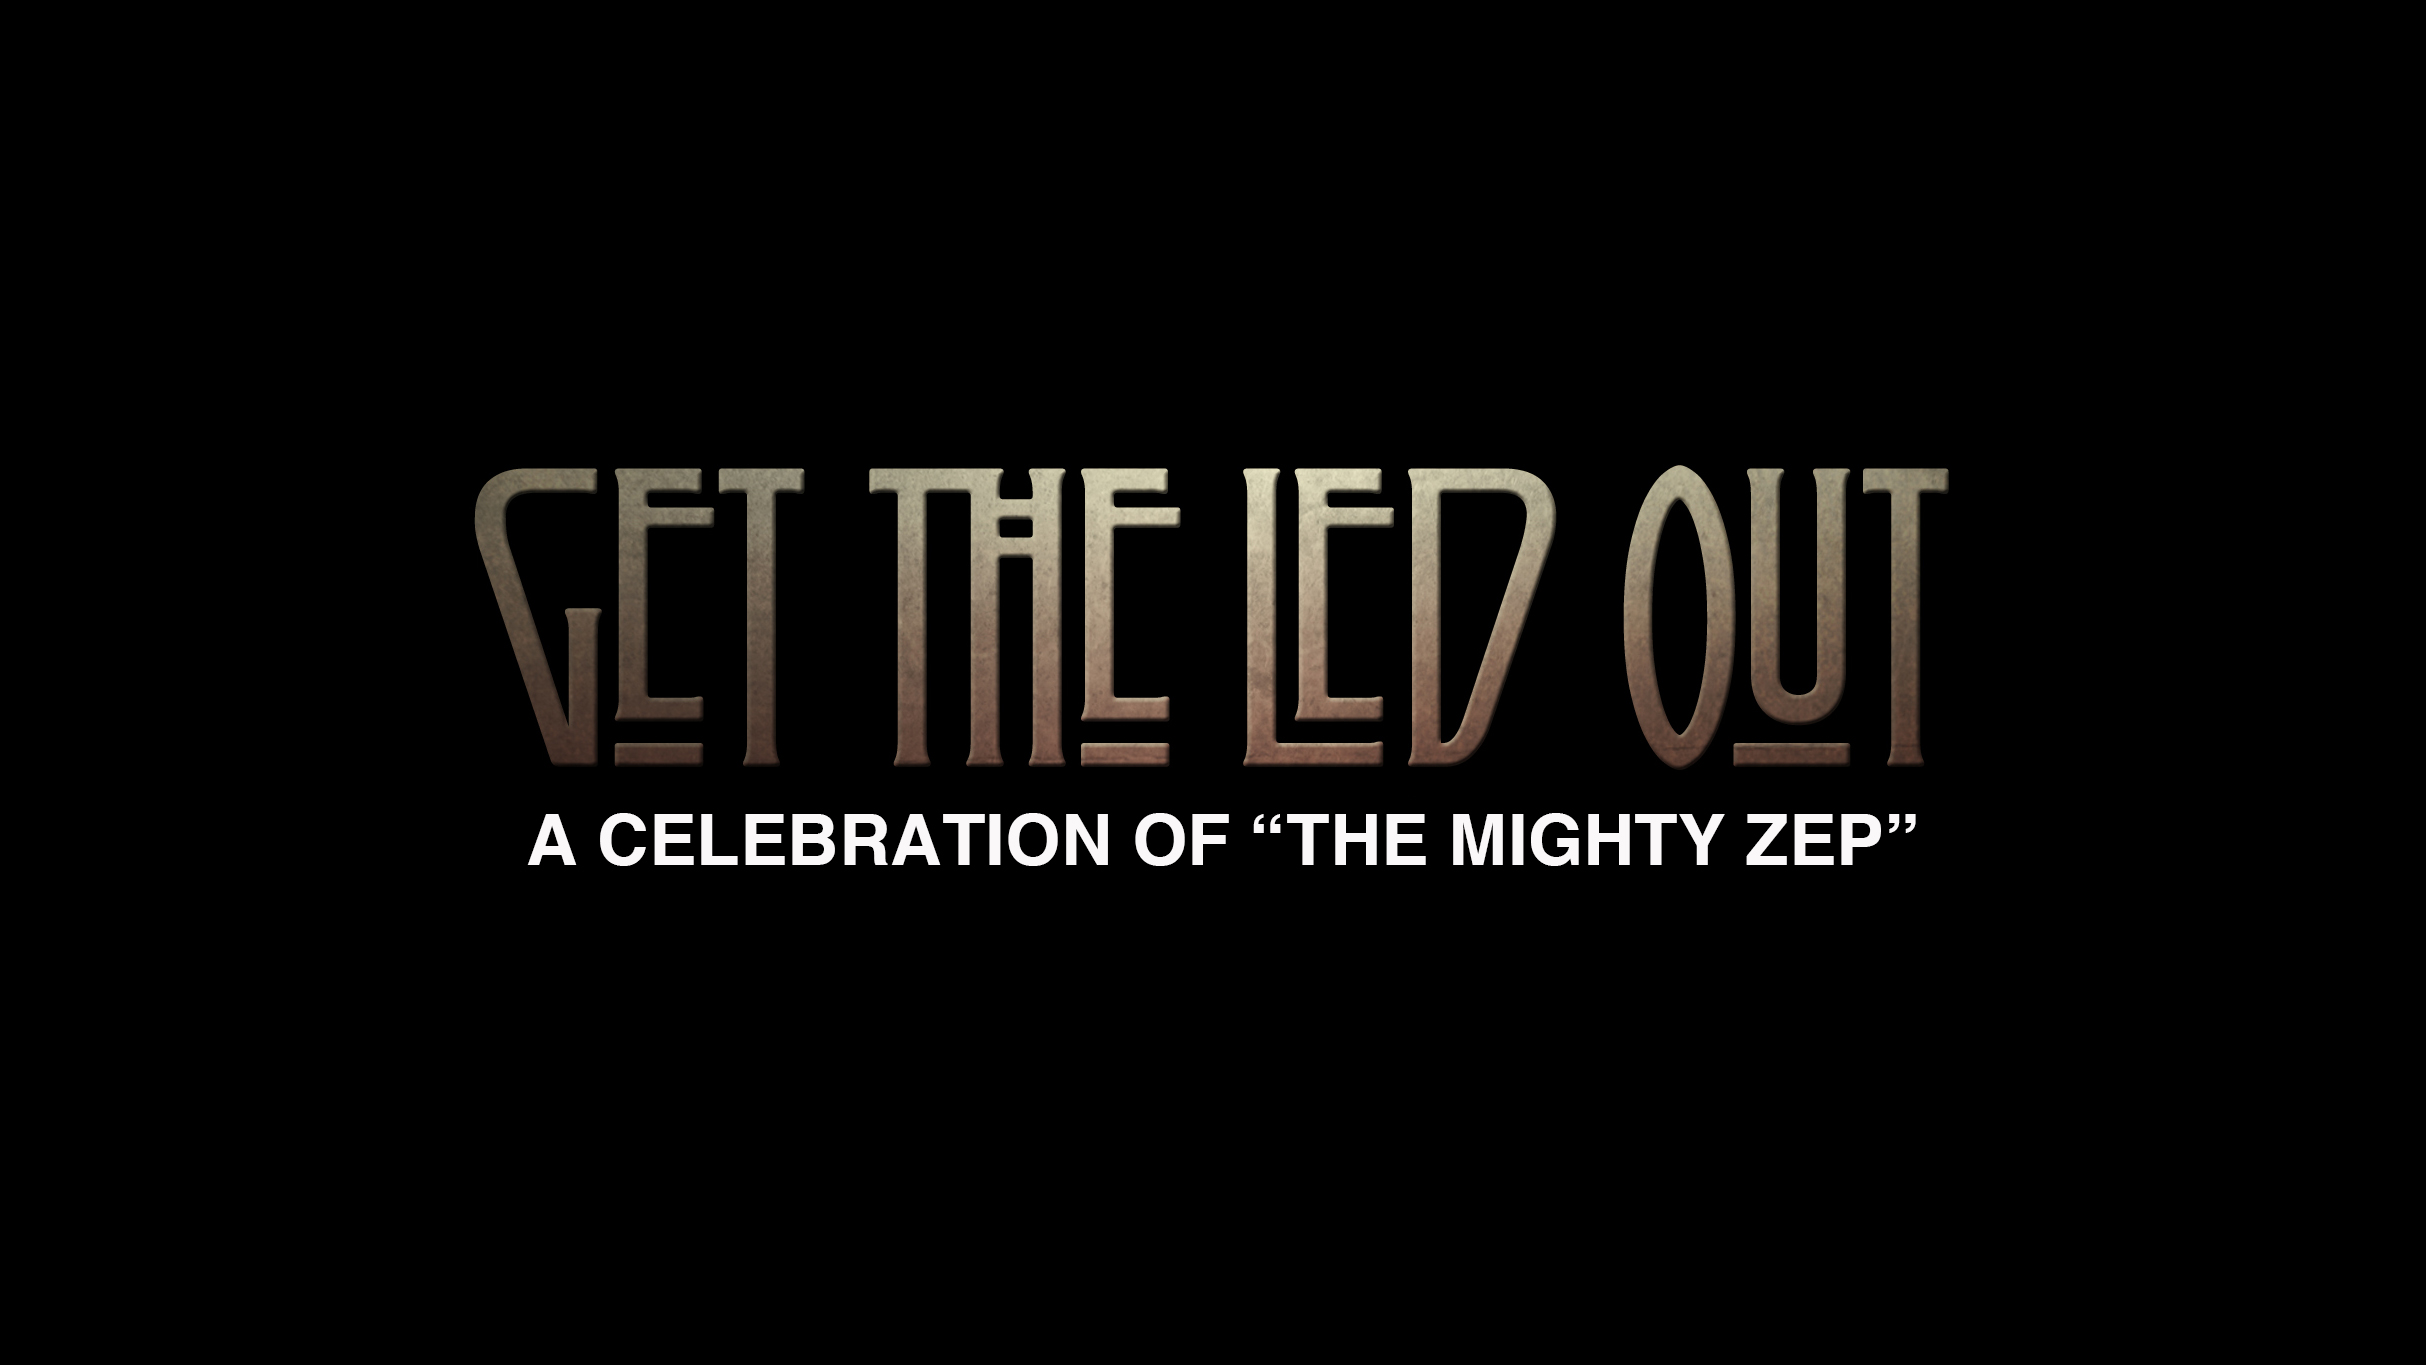 Get The Led Out @ Rialto Theatre